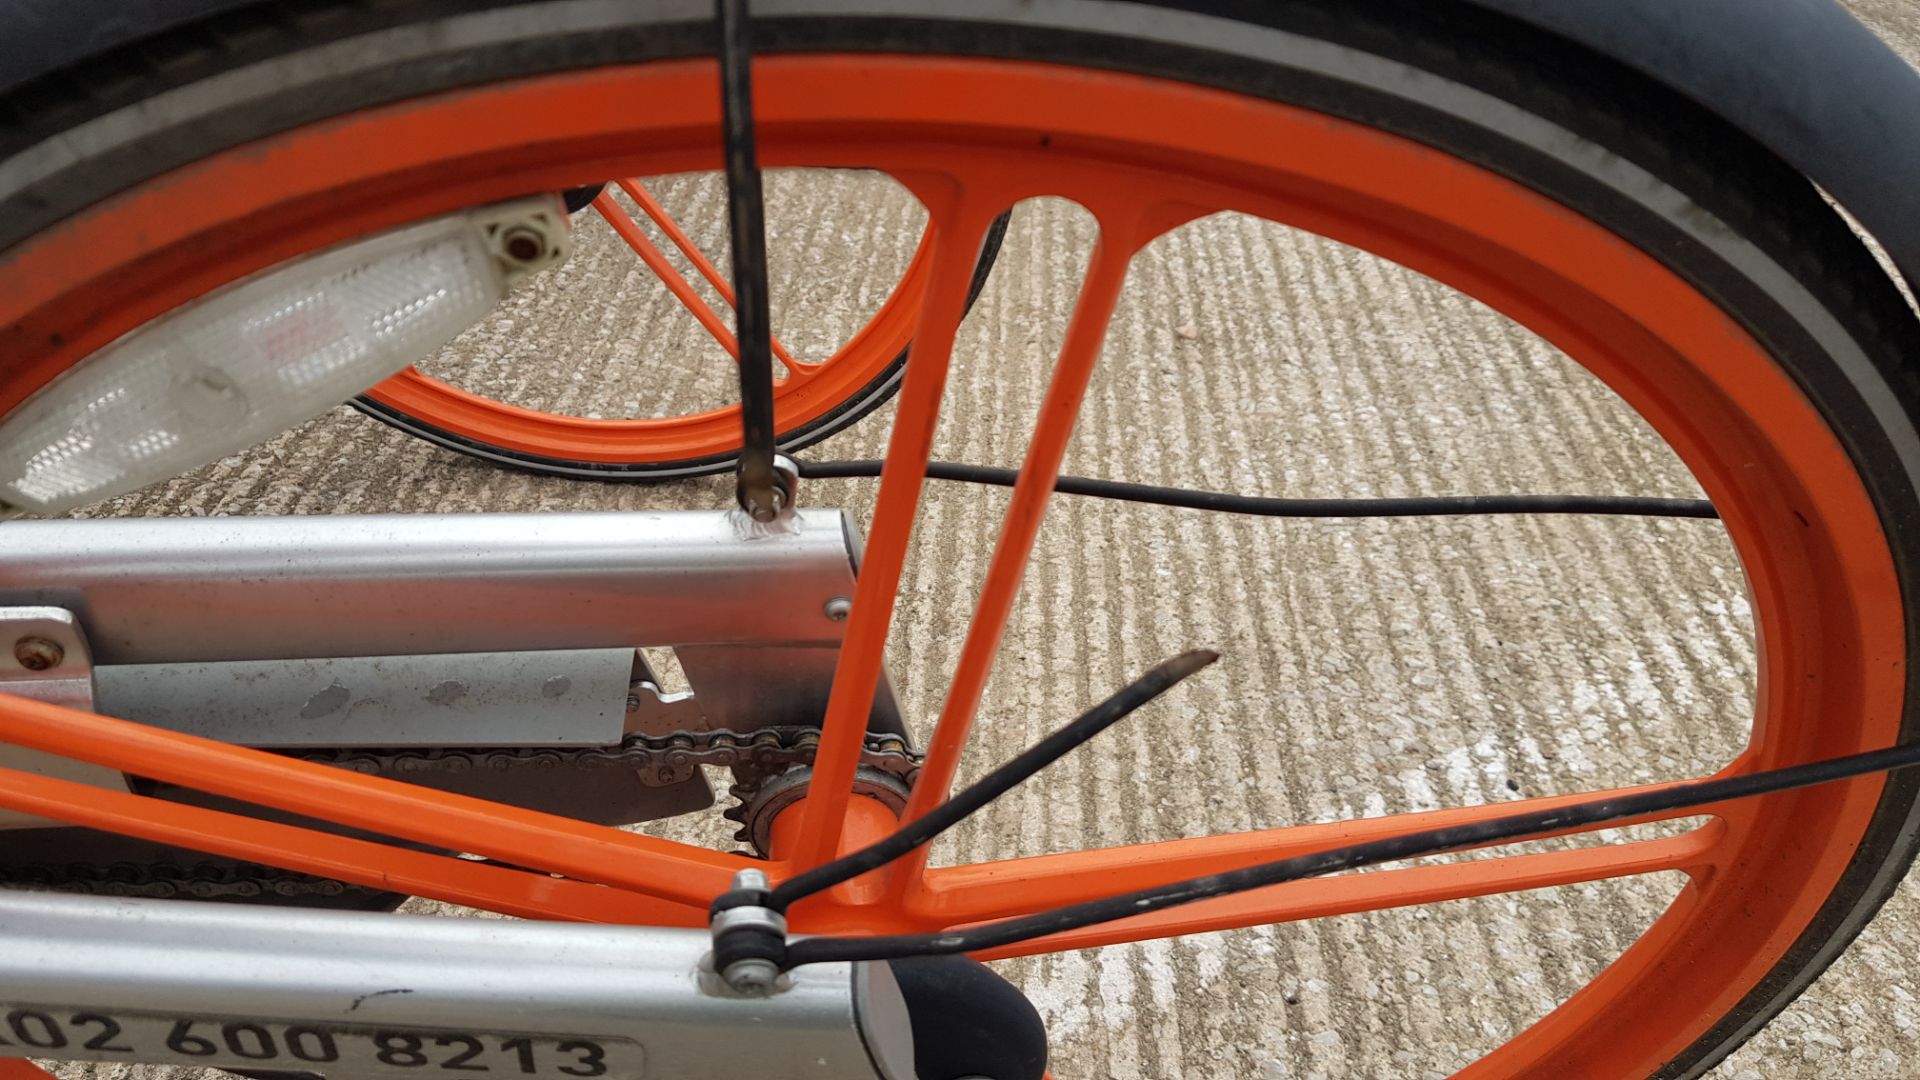 2 X SLIGHTLY DAMAGED ORANGE & SILVER CITY / CAMPING BICYCLES - ROBUST ALUMINIUM 19 X 48 FRAME, SOLID - Image 4 of 6